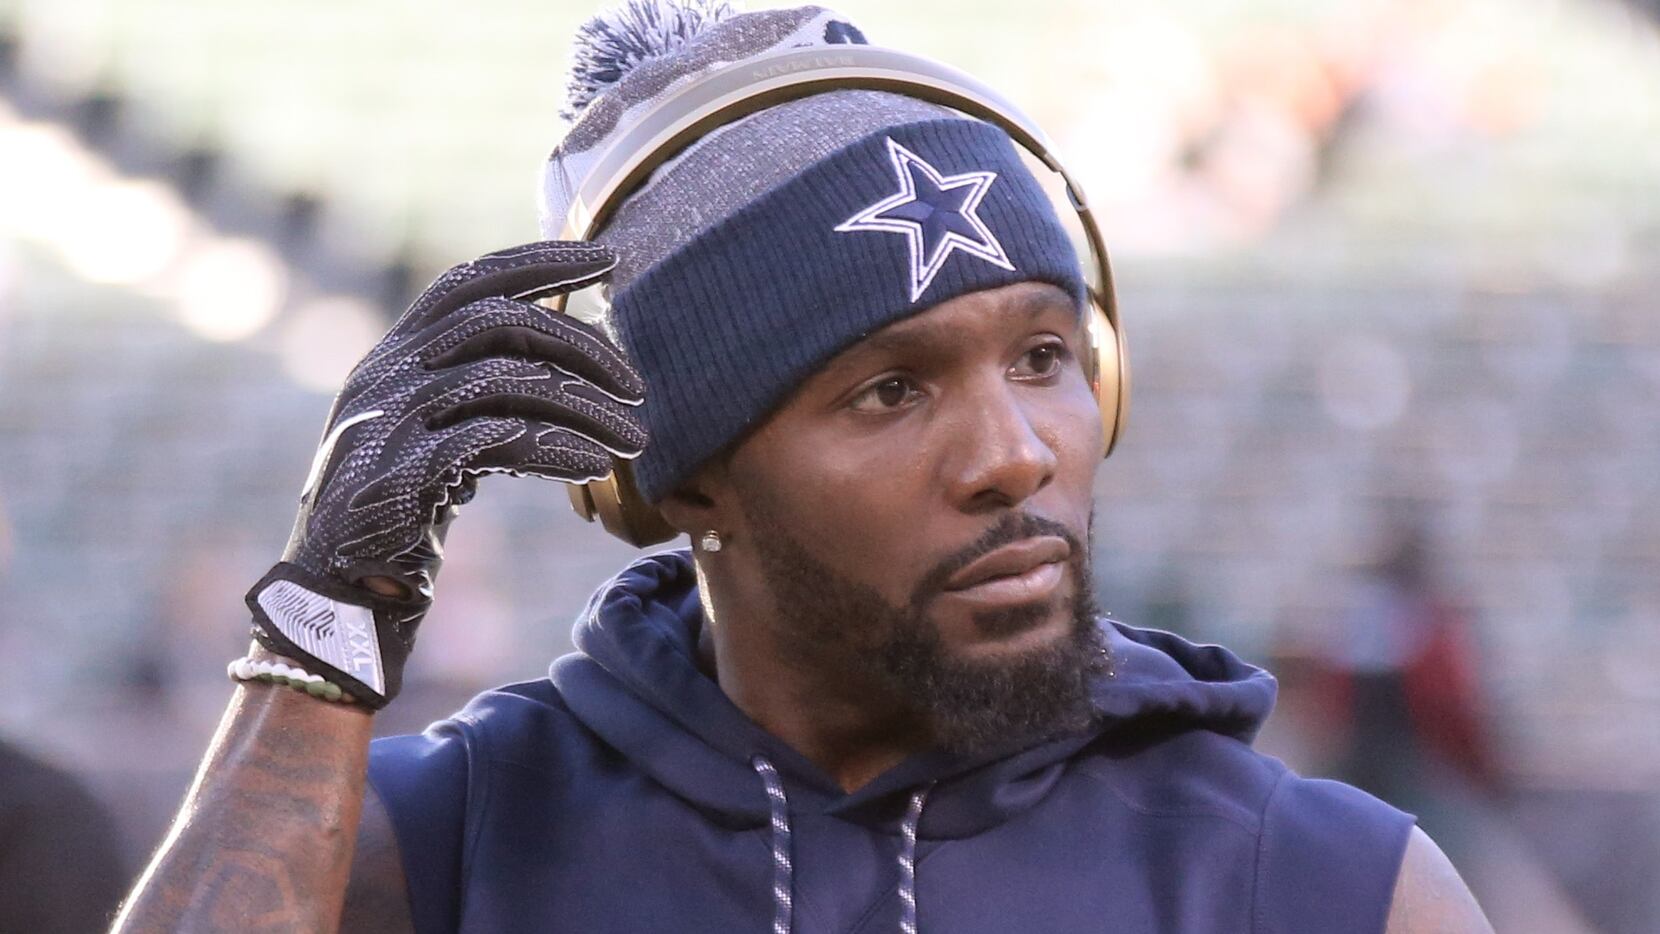 Dallas Cowboys wide receiver Dez Bryant (88) is pictured during warmups before the Dallas...